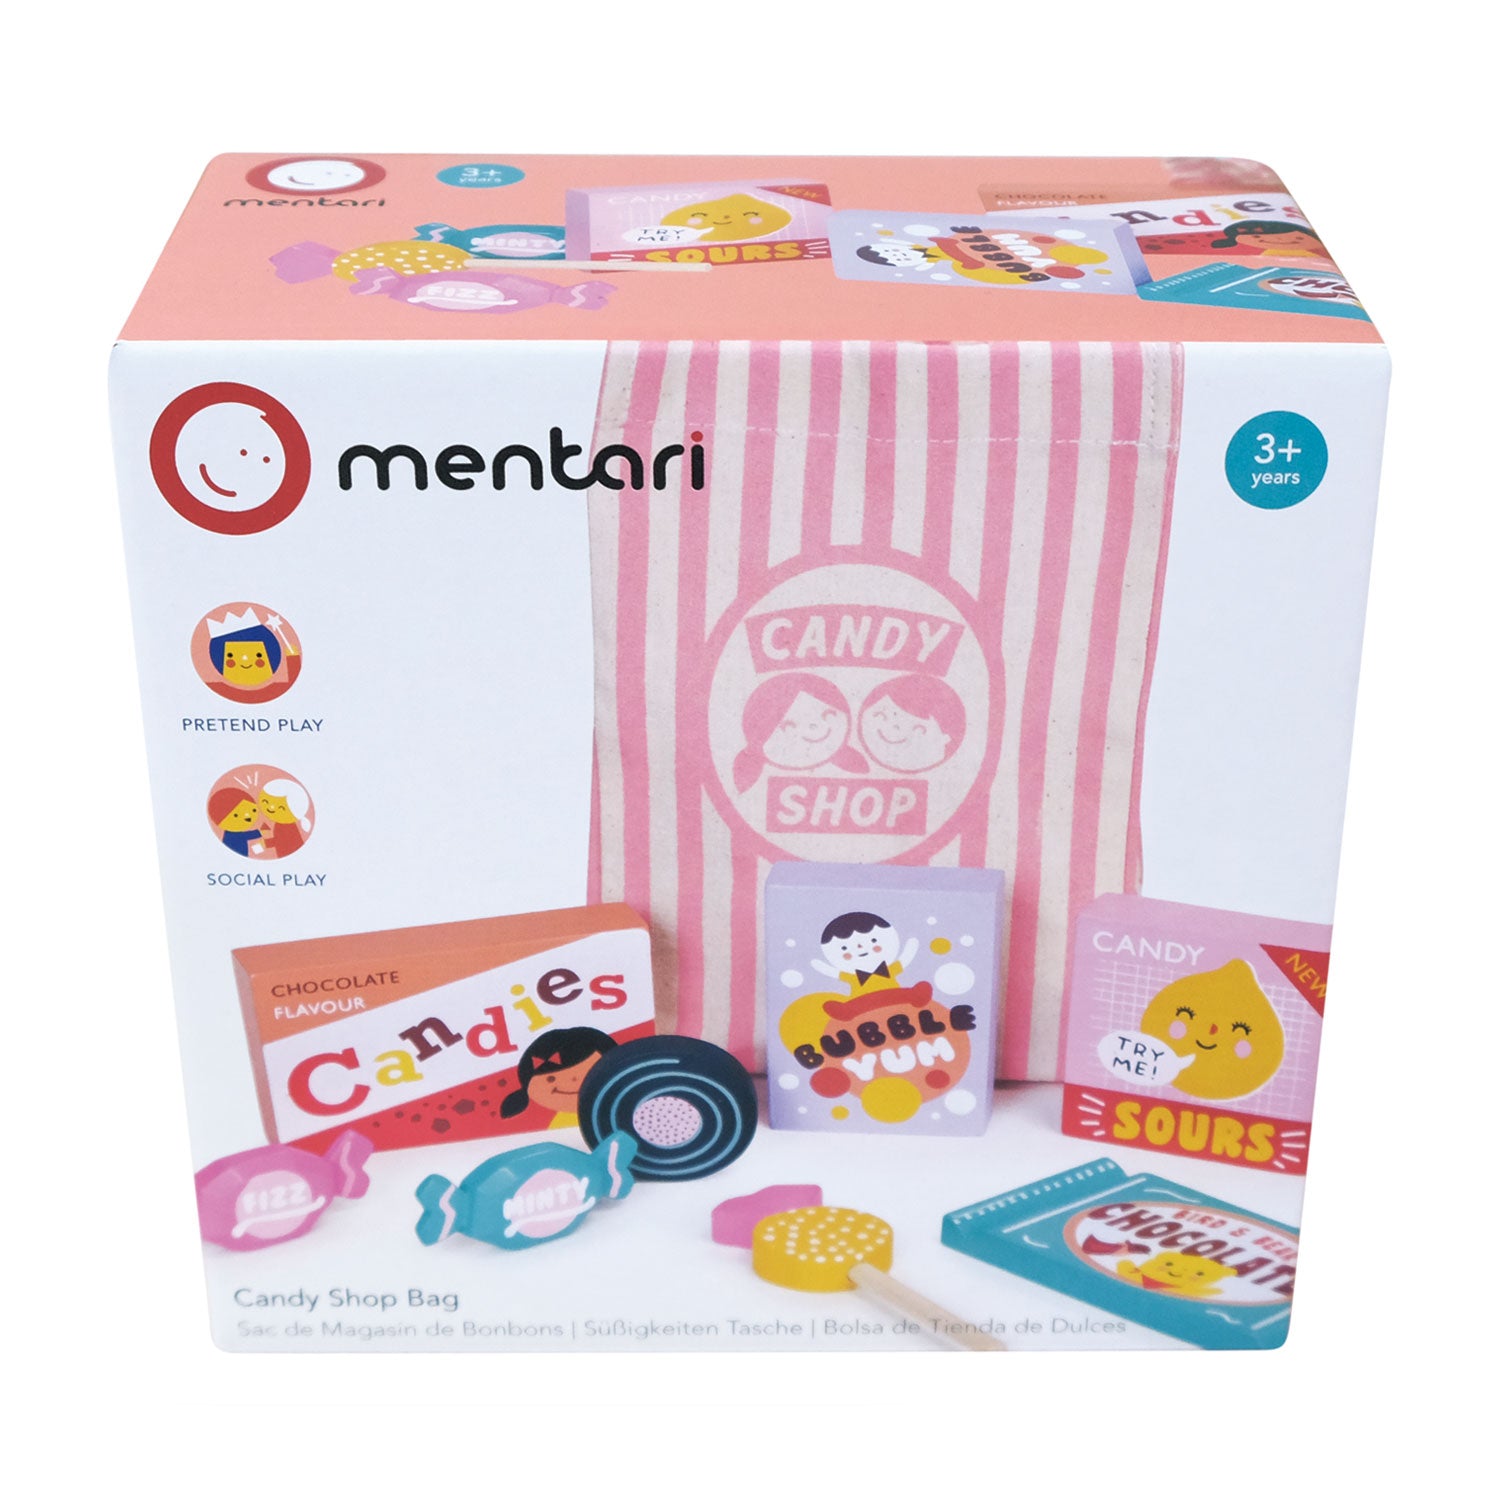 Box containing wooden toy candy shop bag playset